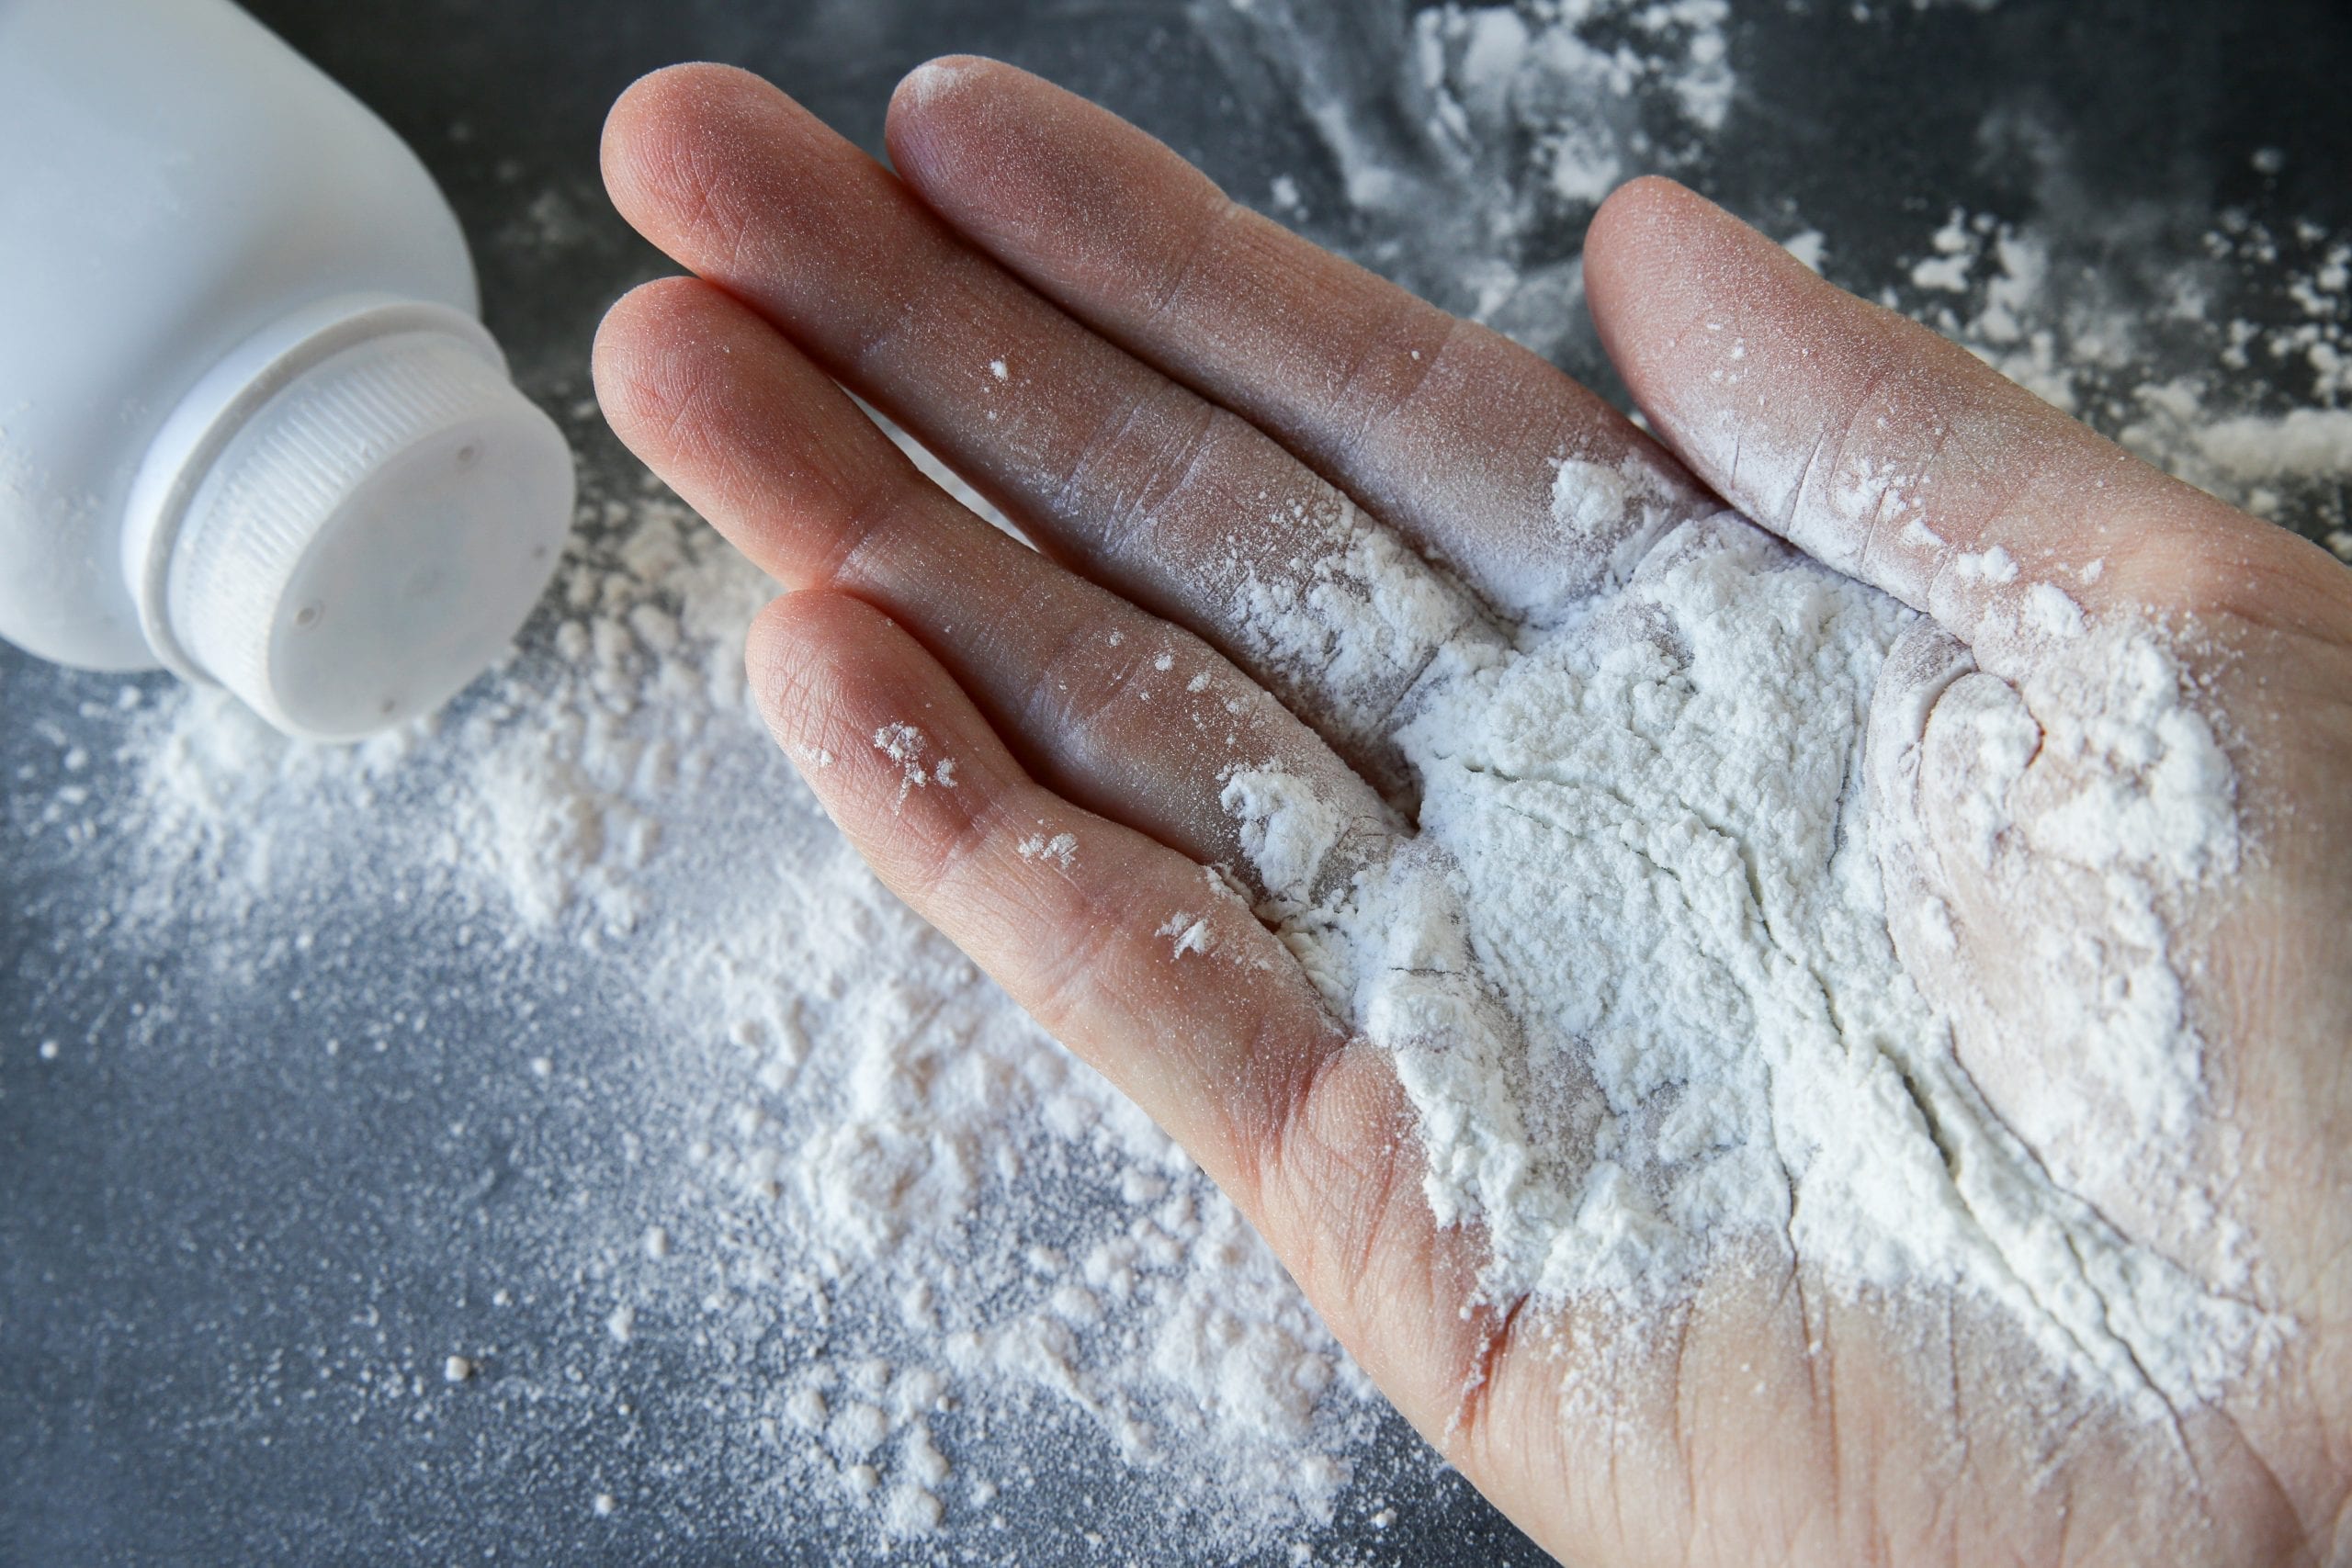 Study Shows Some Talc Products Contain Asbestos